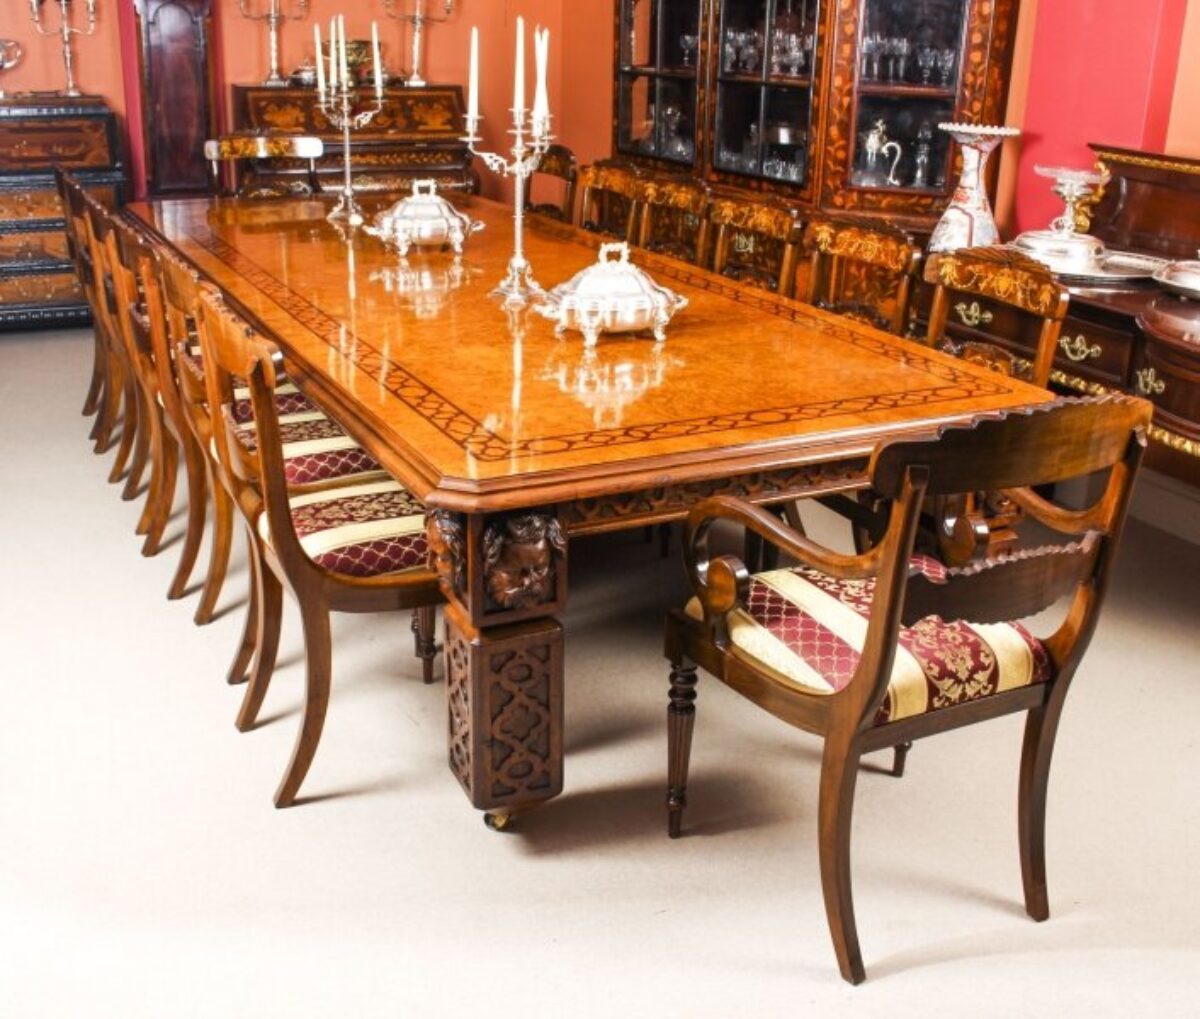 A Look at Our Marvellous Antique Dining Table and Chairs Sets ...